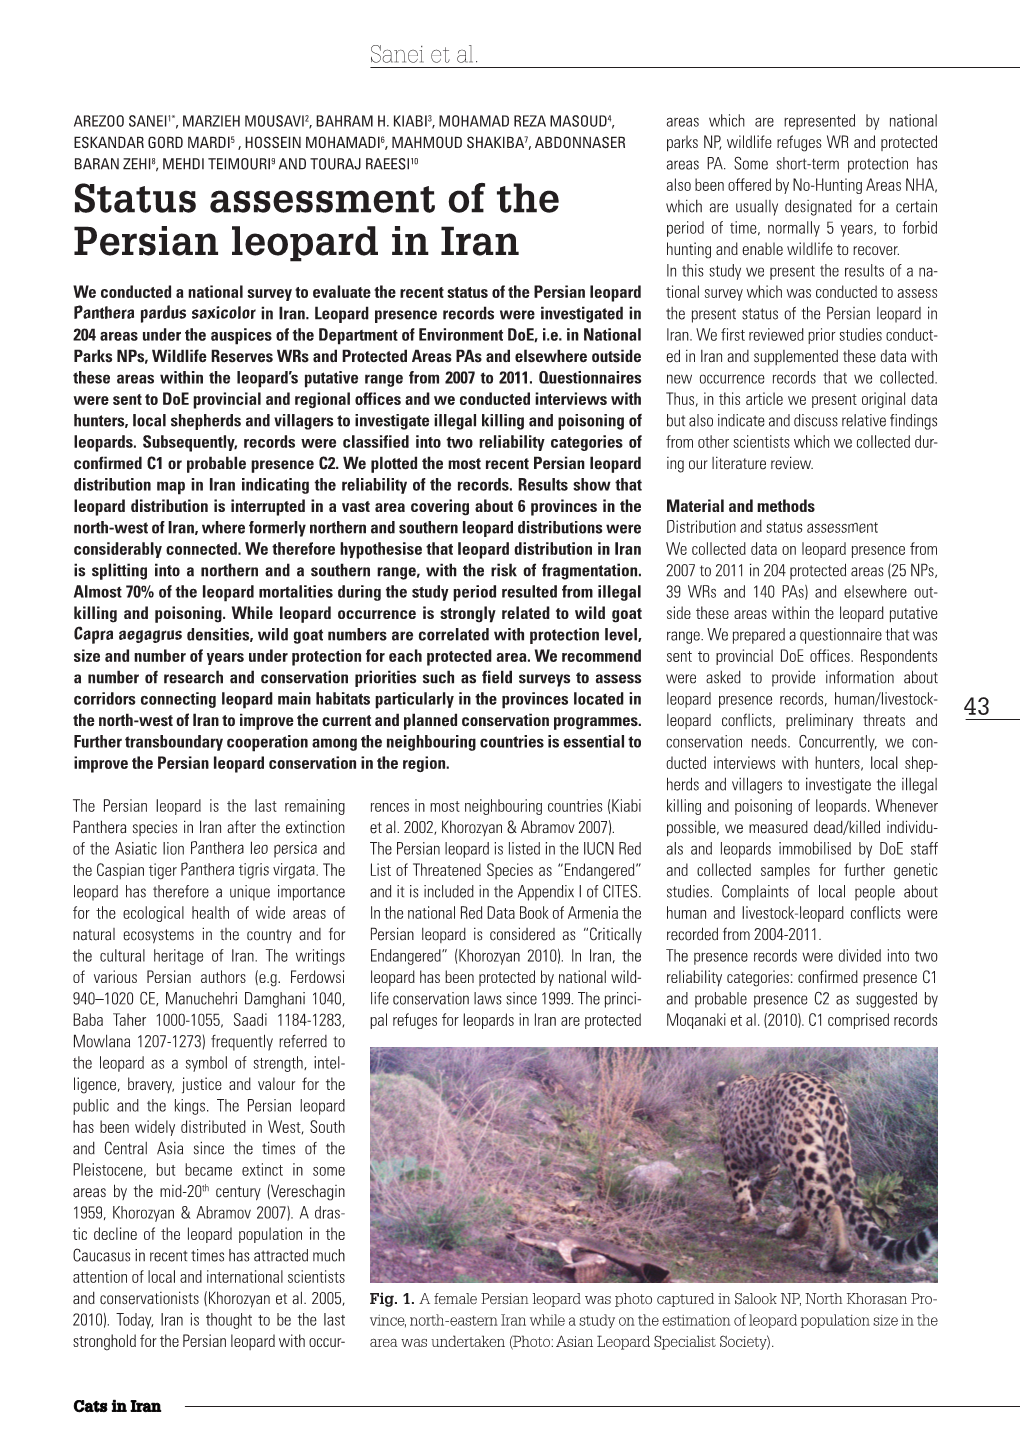 Status Assessment of the Persian Leopard in Iran